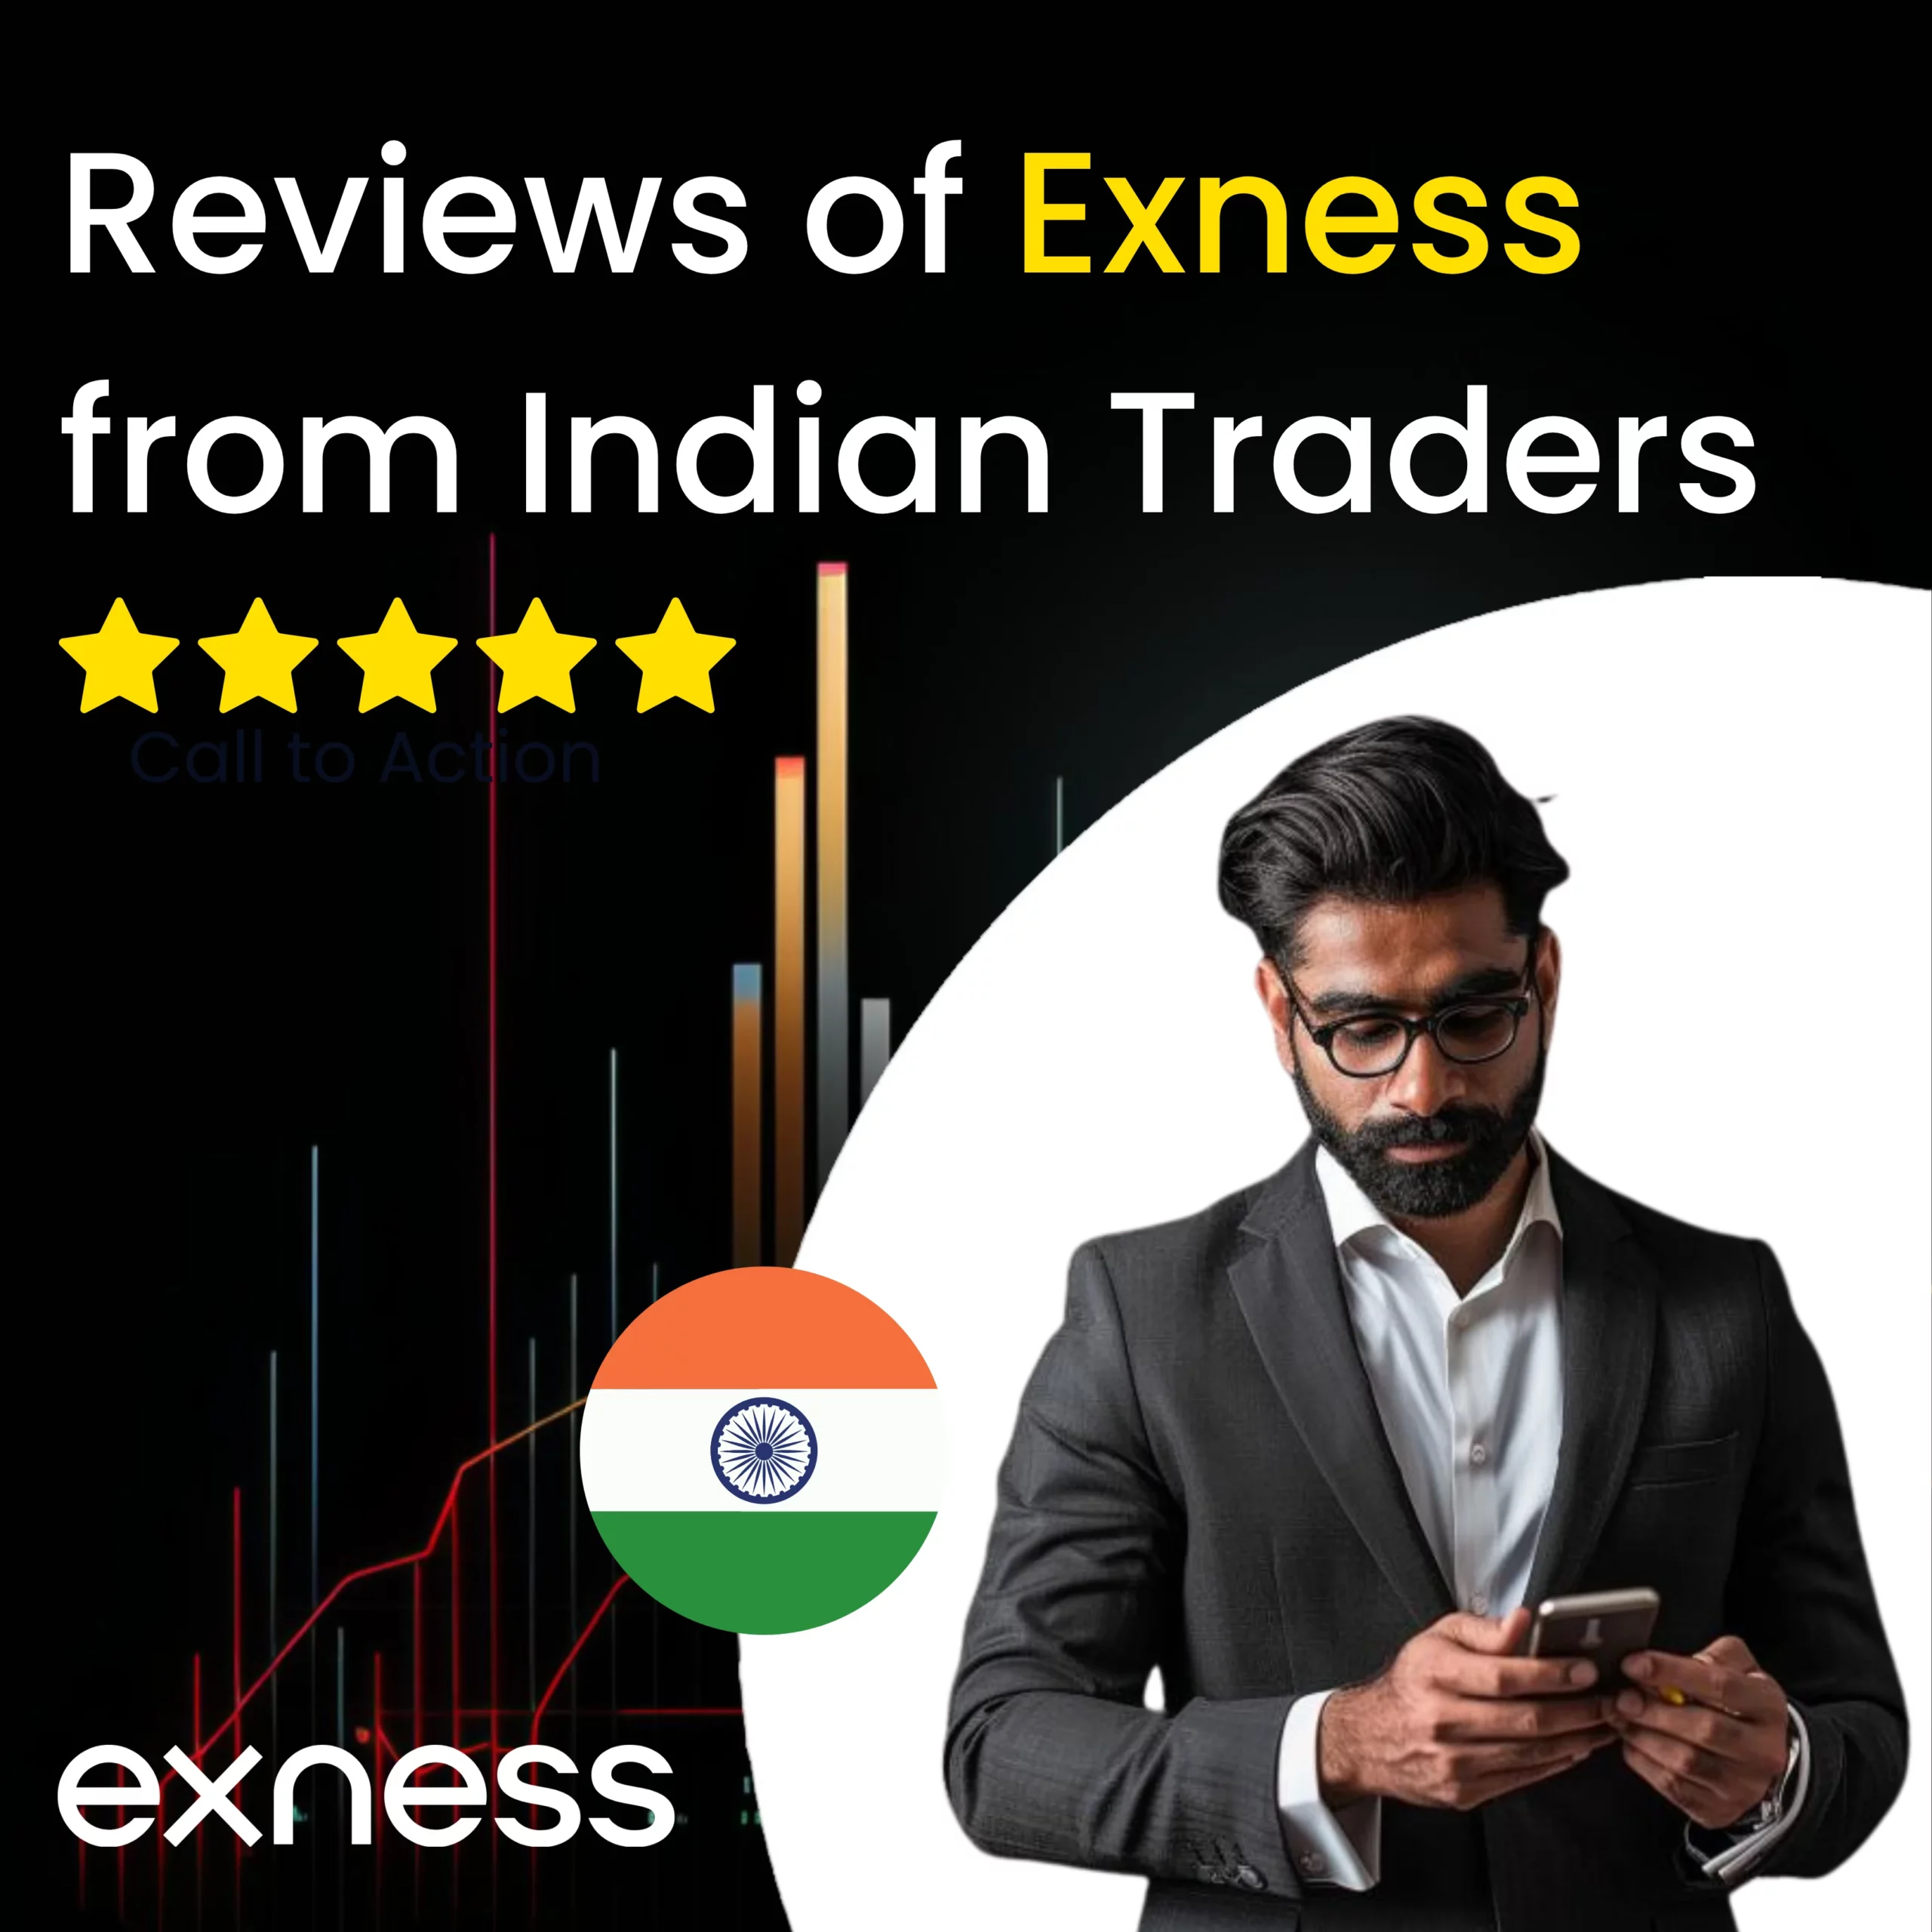 Reviews about Exness from Indian Traders.